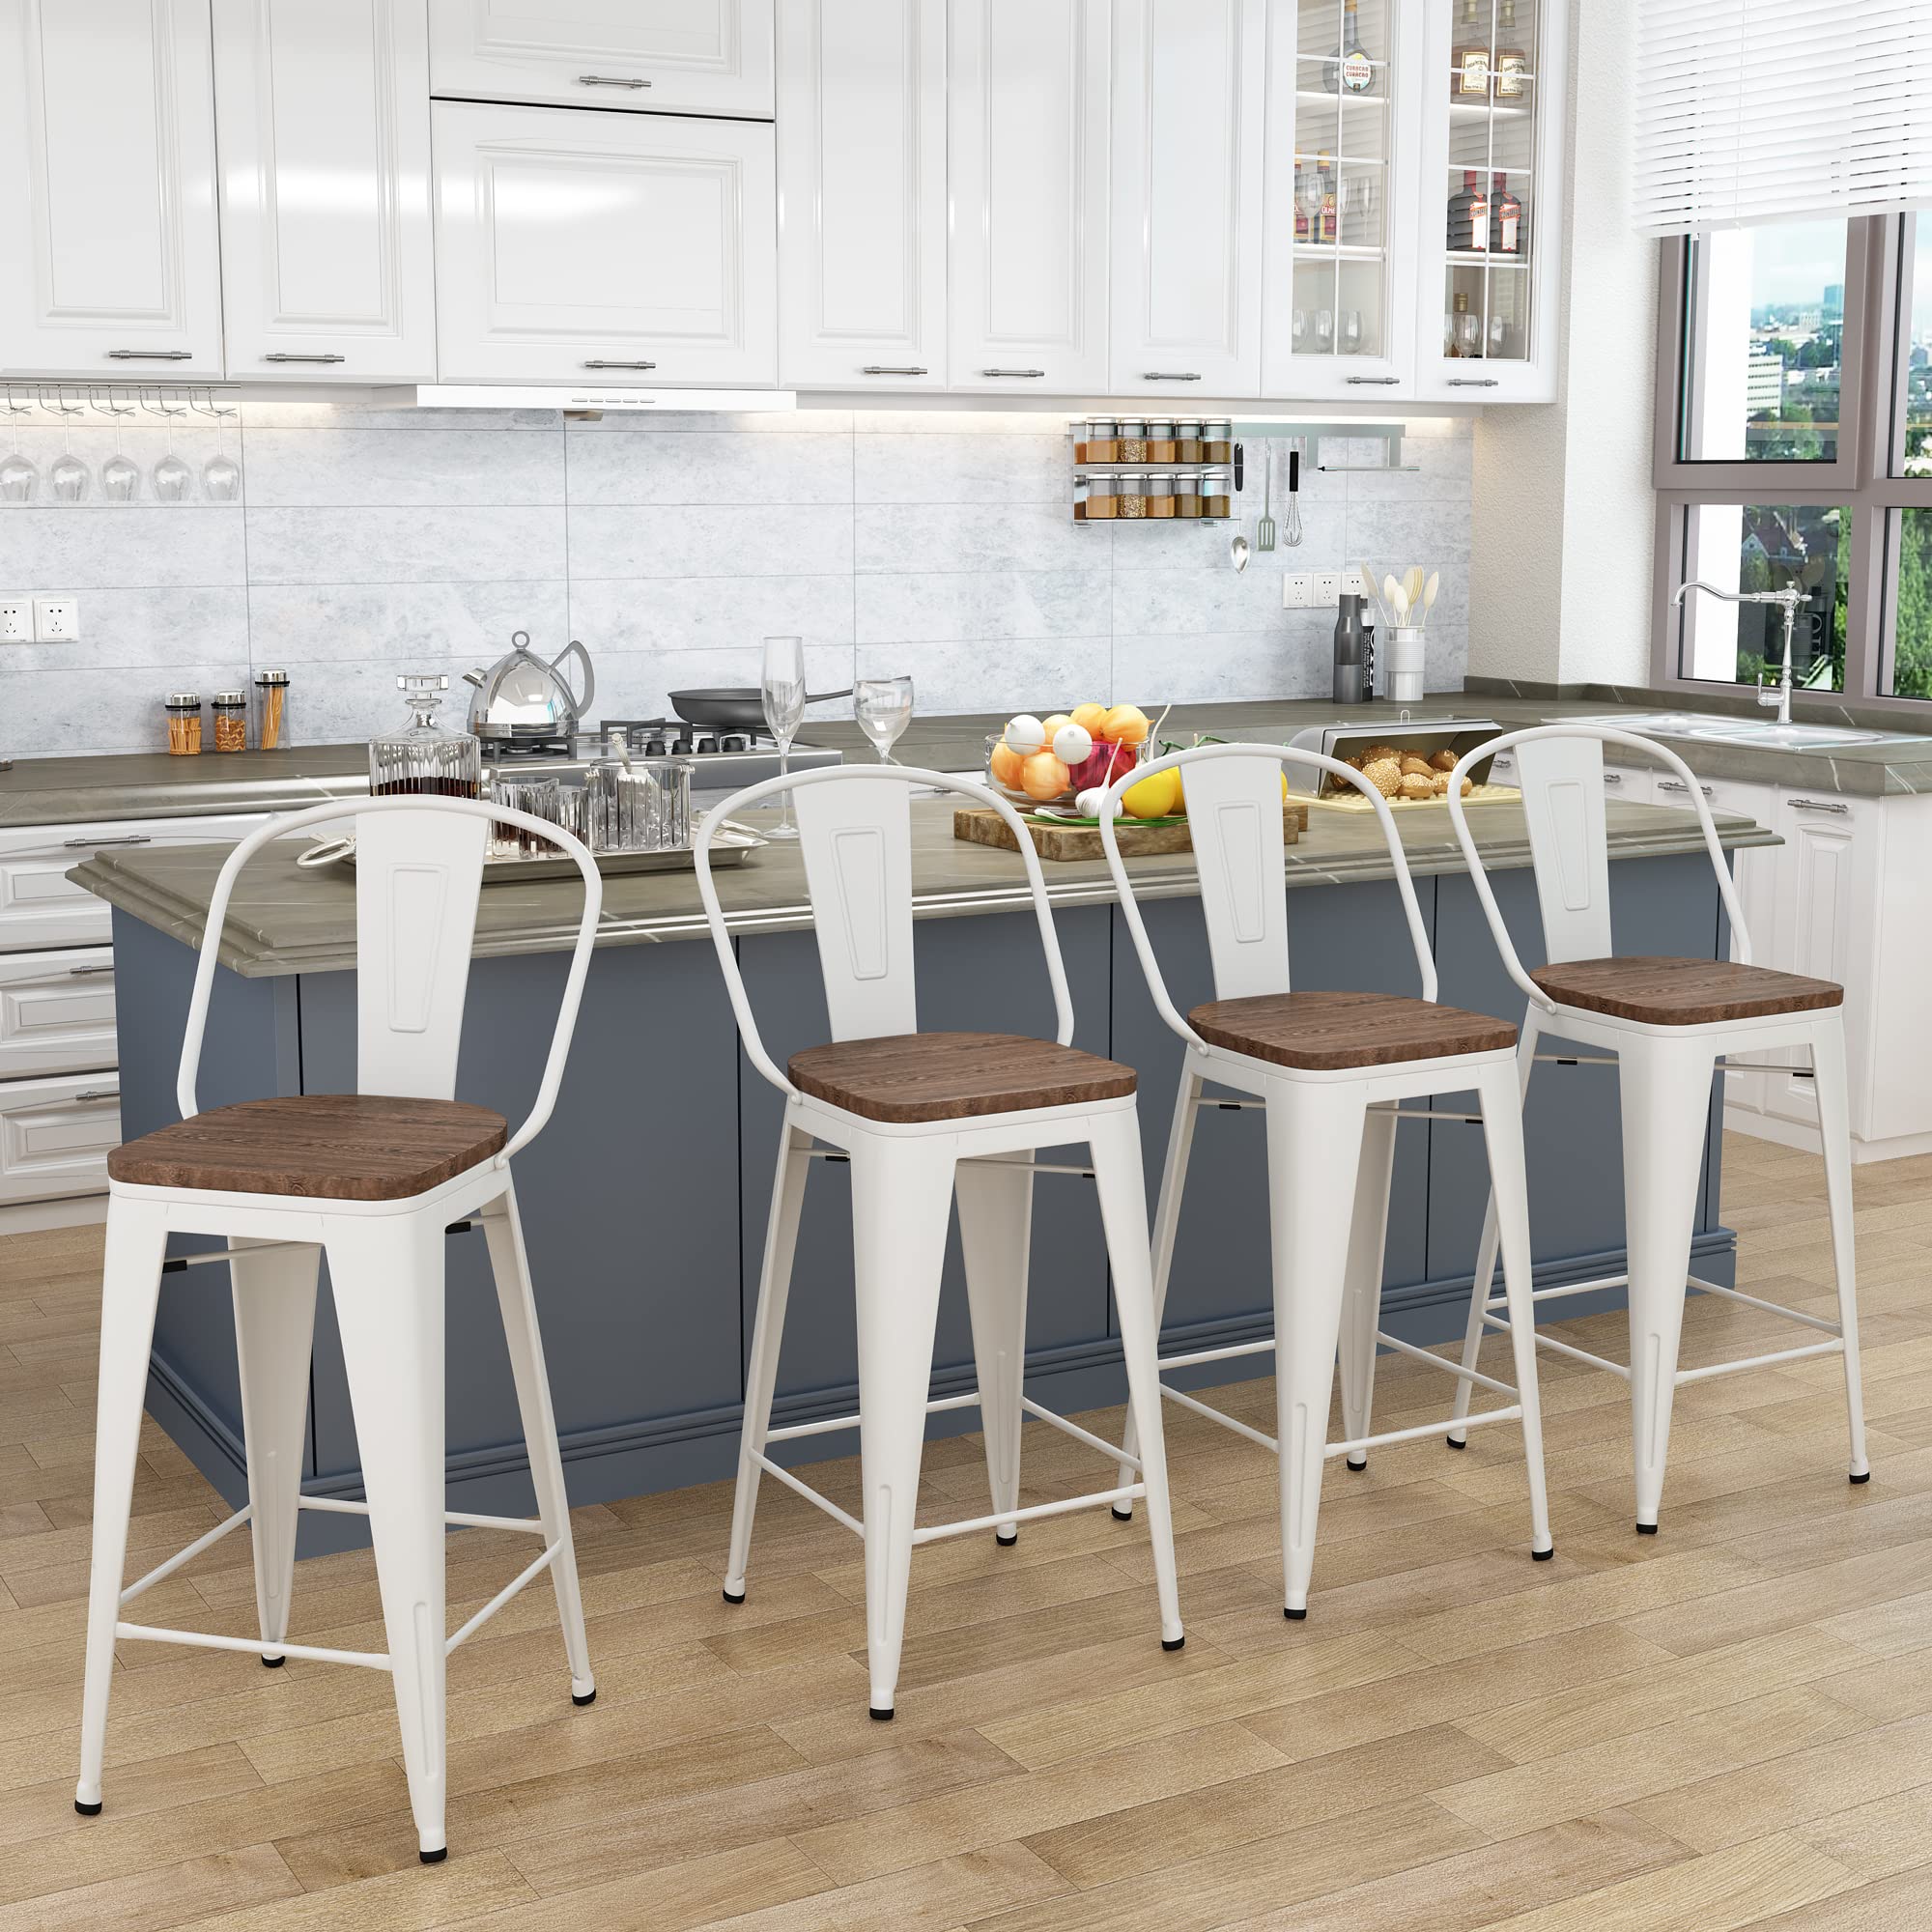 Yongqiang cream White Metal Bar Stools Set of 4 Farmhouse Kitchen counter Height chairs 26 High Back Barstools with Wooden Seat